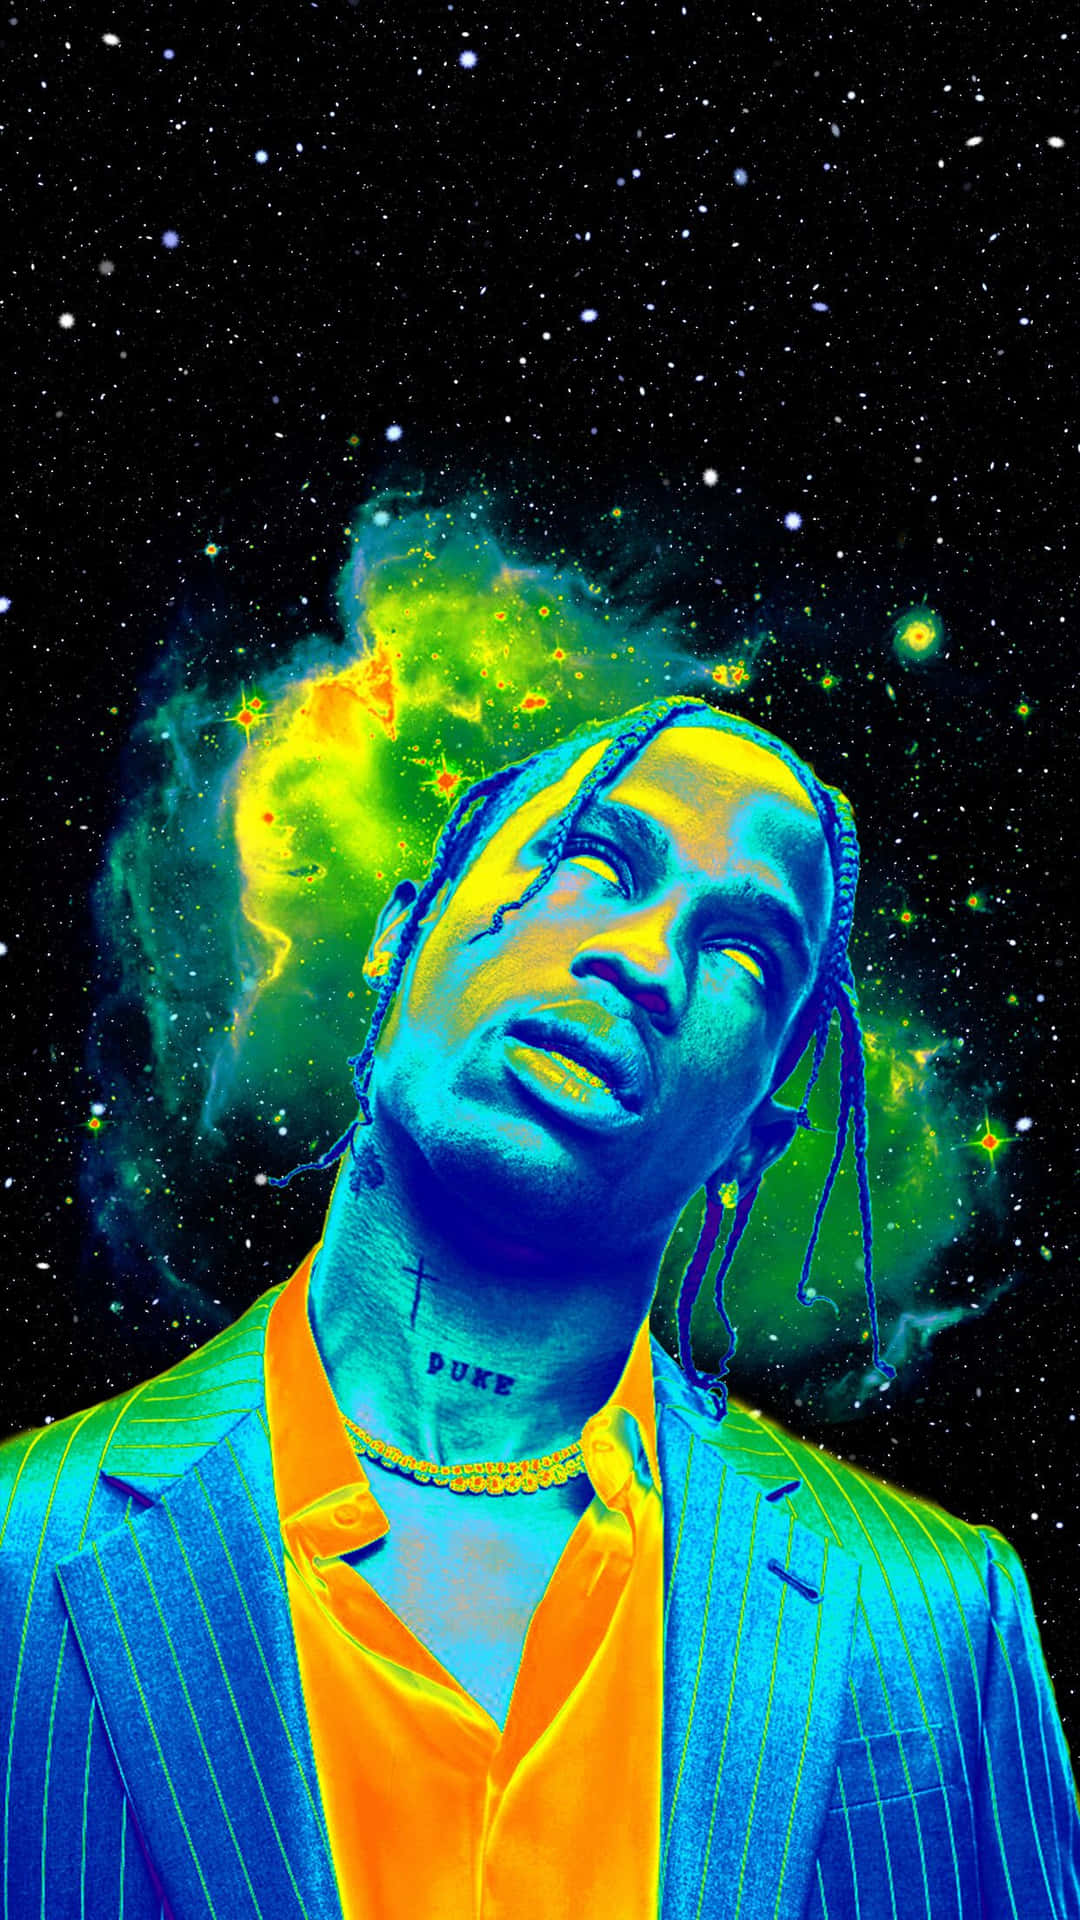 Get 'Astronomical' and upgrade your iPhone with the limited edition Travis Scott cosmetics. Wallpaper